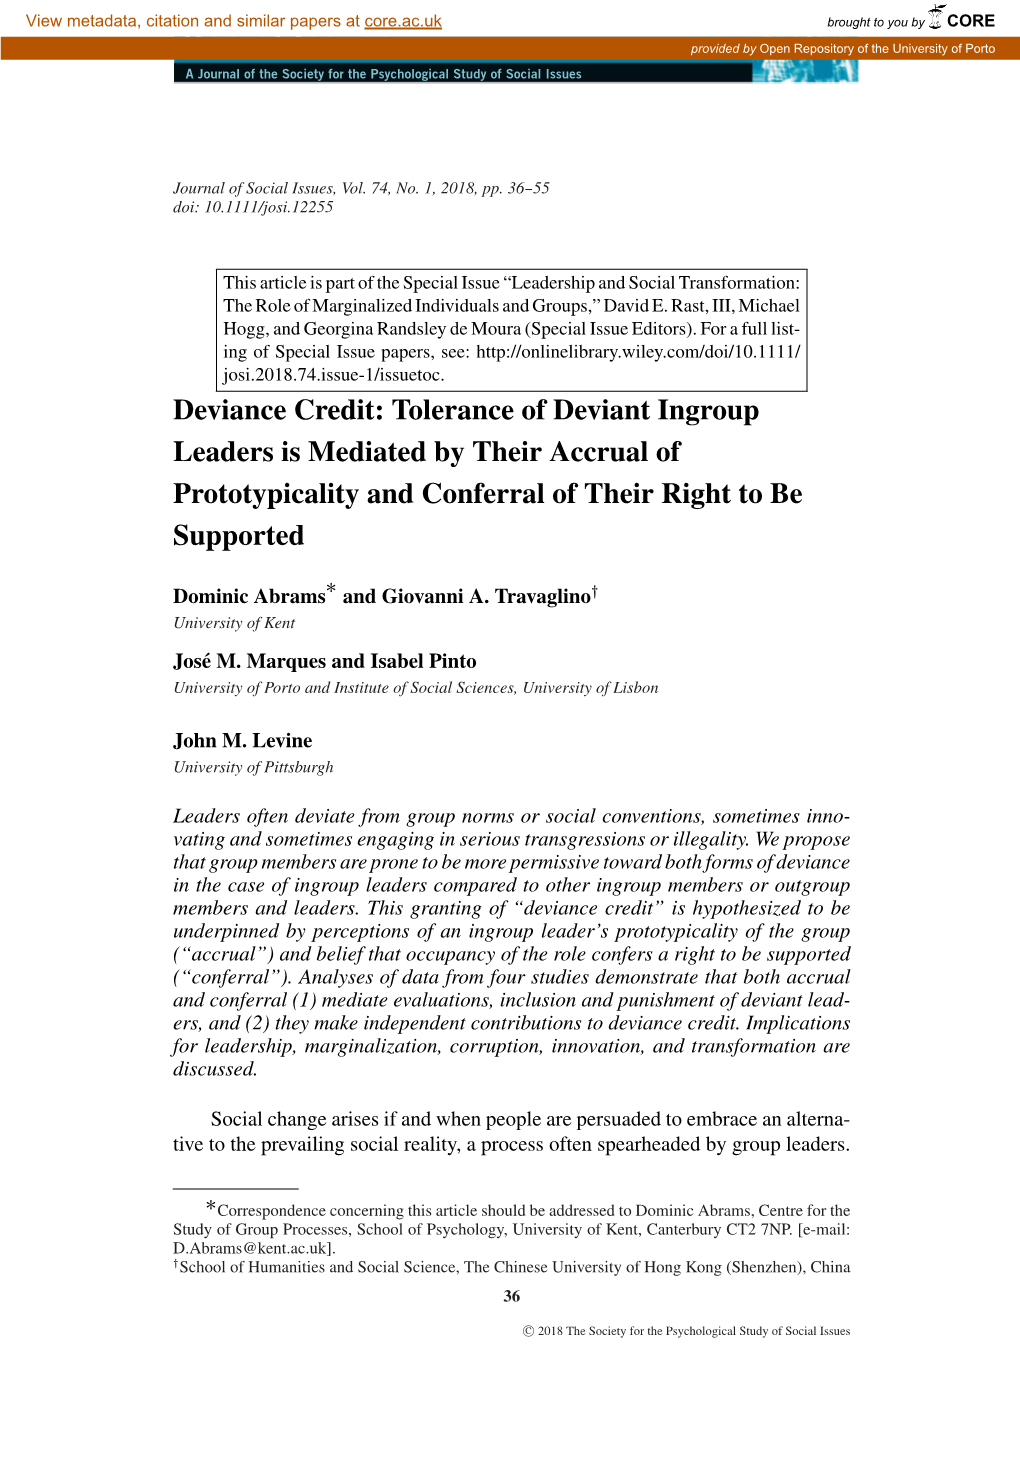 Deviance Credit: Tolerance of Deviant Ingroup Leaders Is Mediated by Their Accrual of Prototypicality and Conferral of Their Right to Be Supported